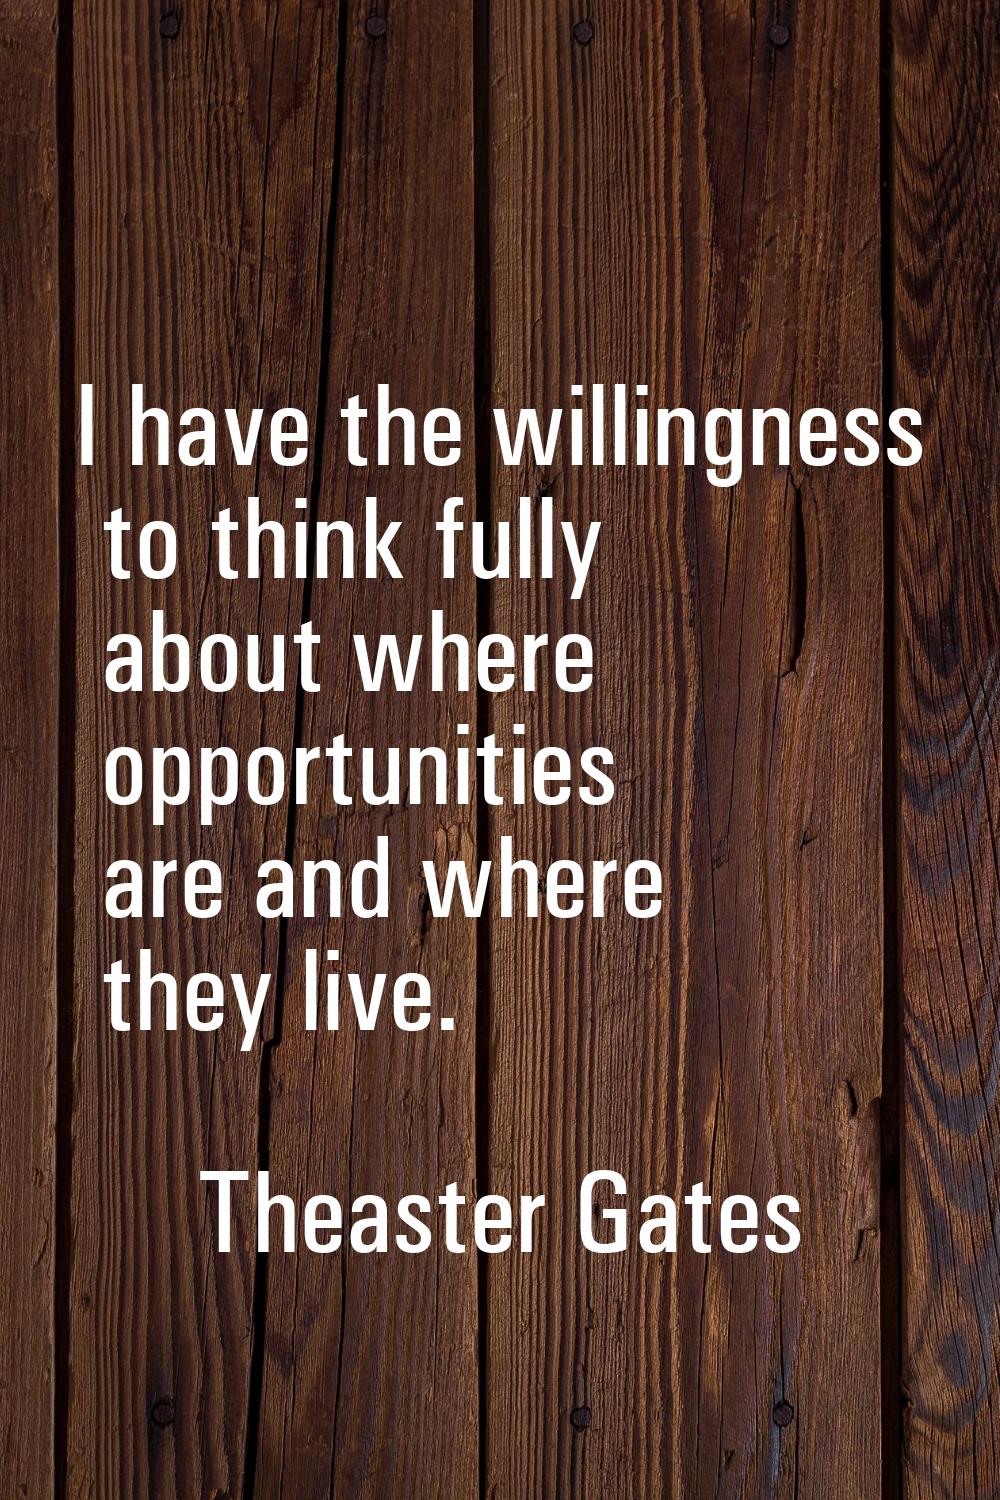 I have the willingness to think fully about where opportunities are and where they live.